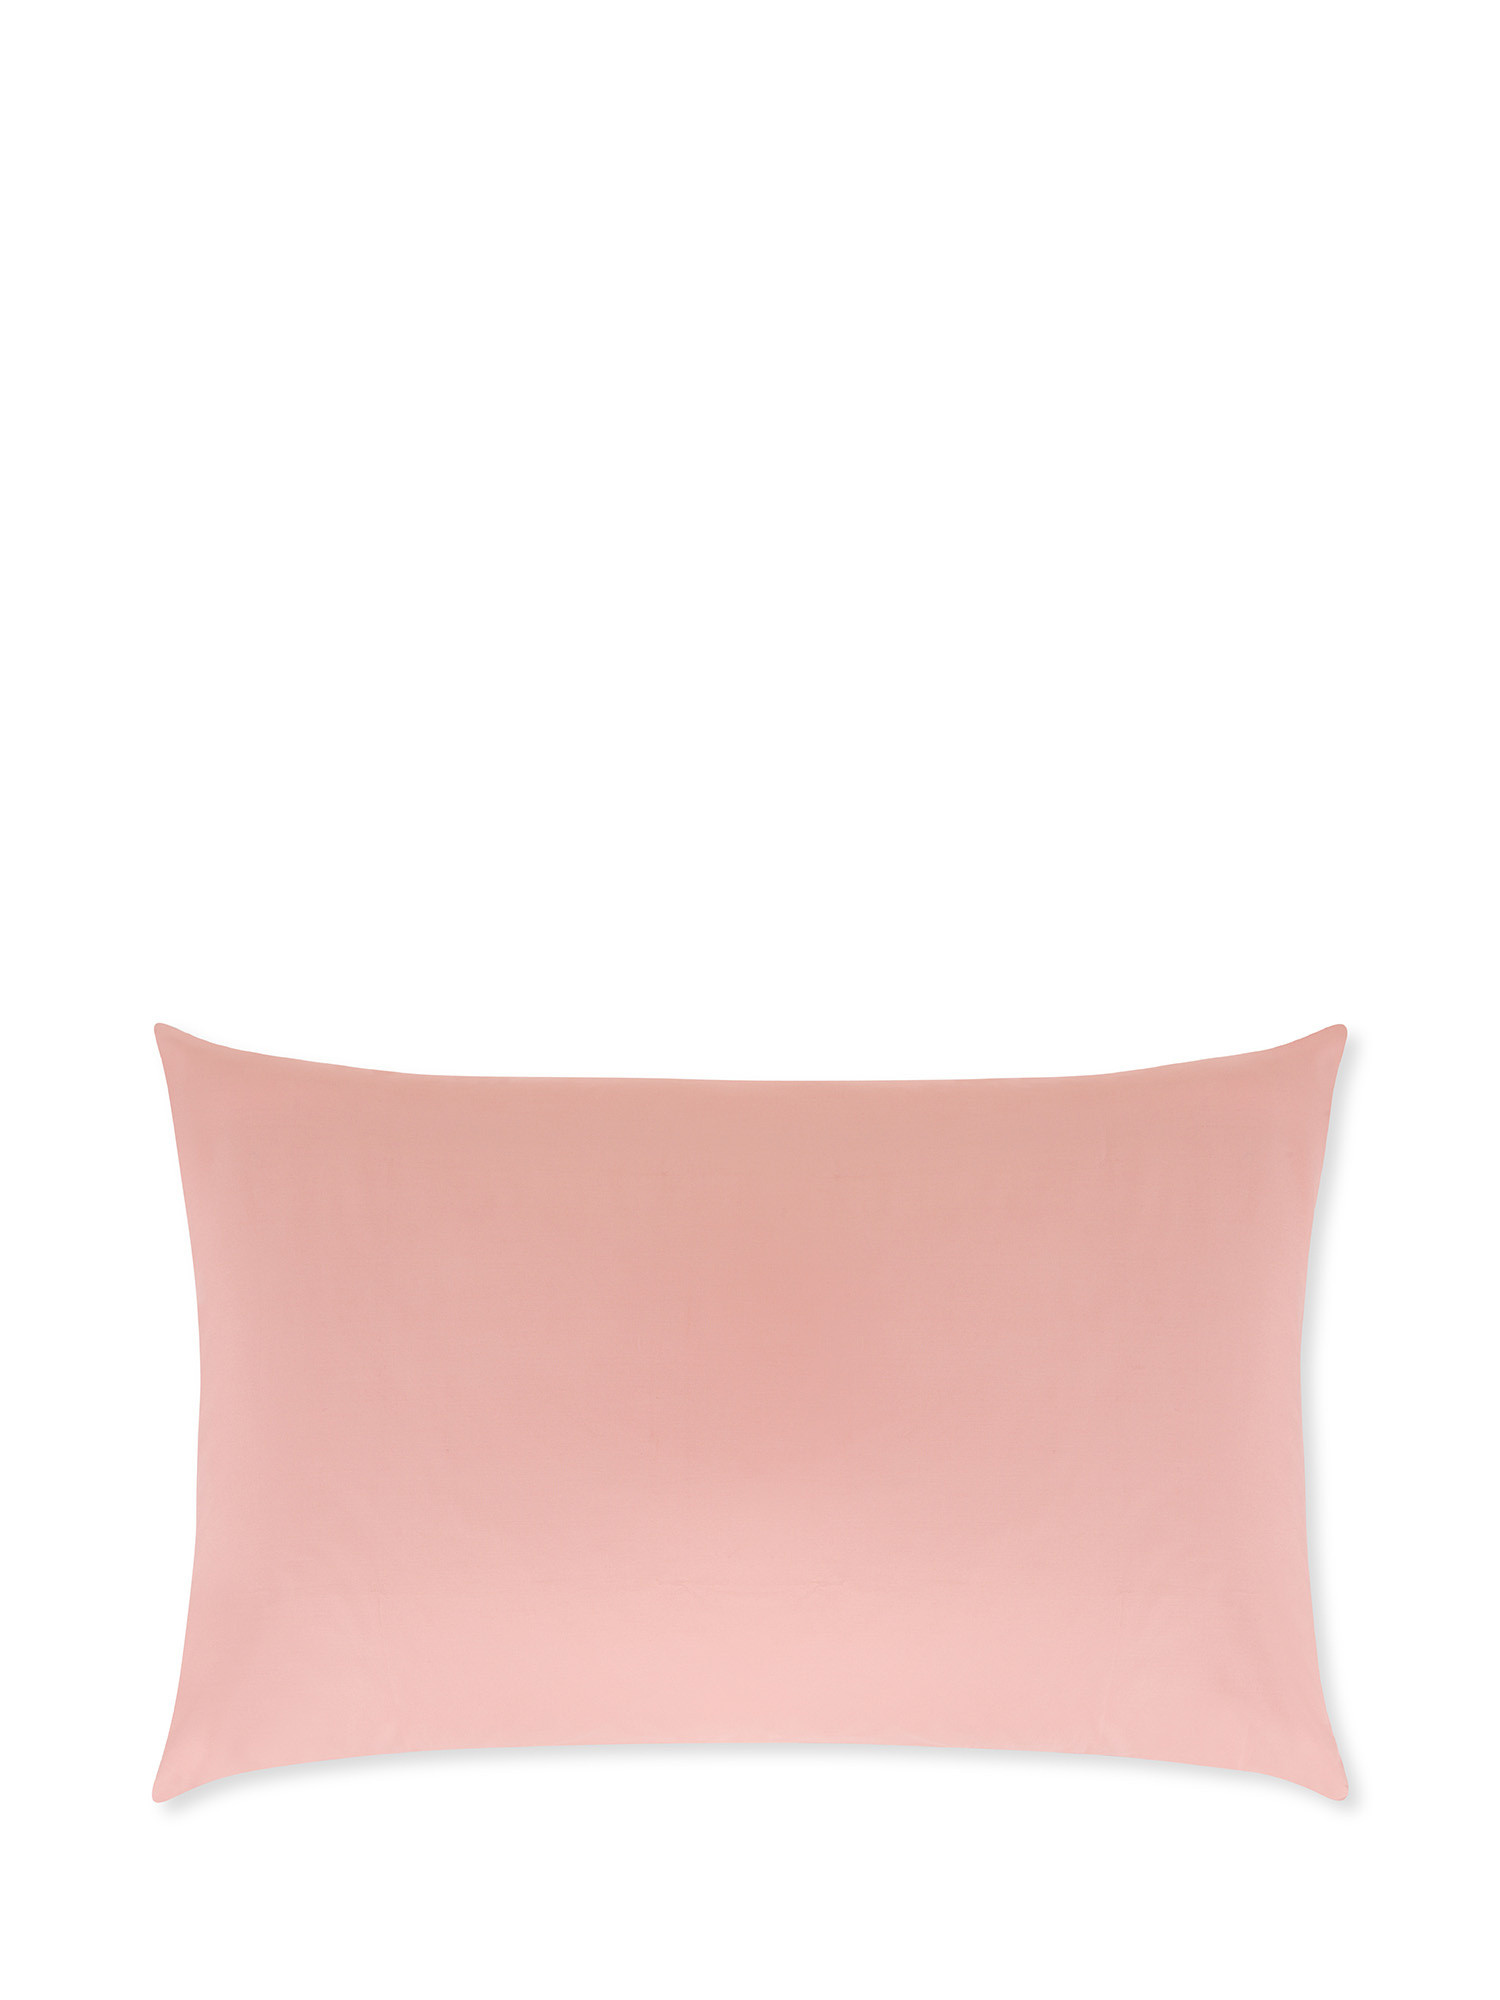 Solid color cotton percale pillowcase, Pink, large image number 0